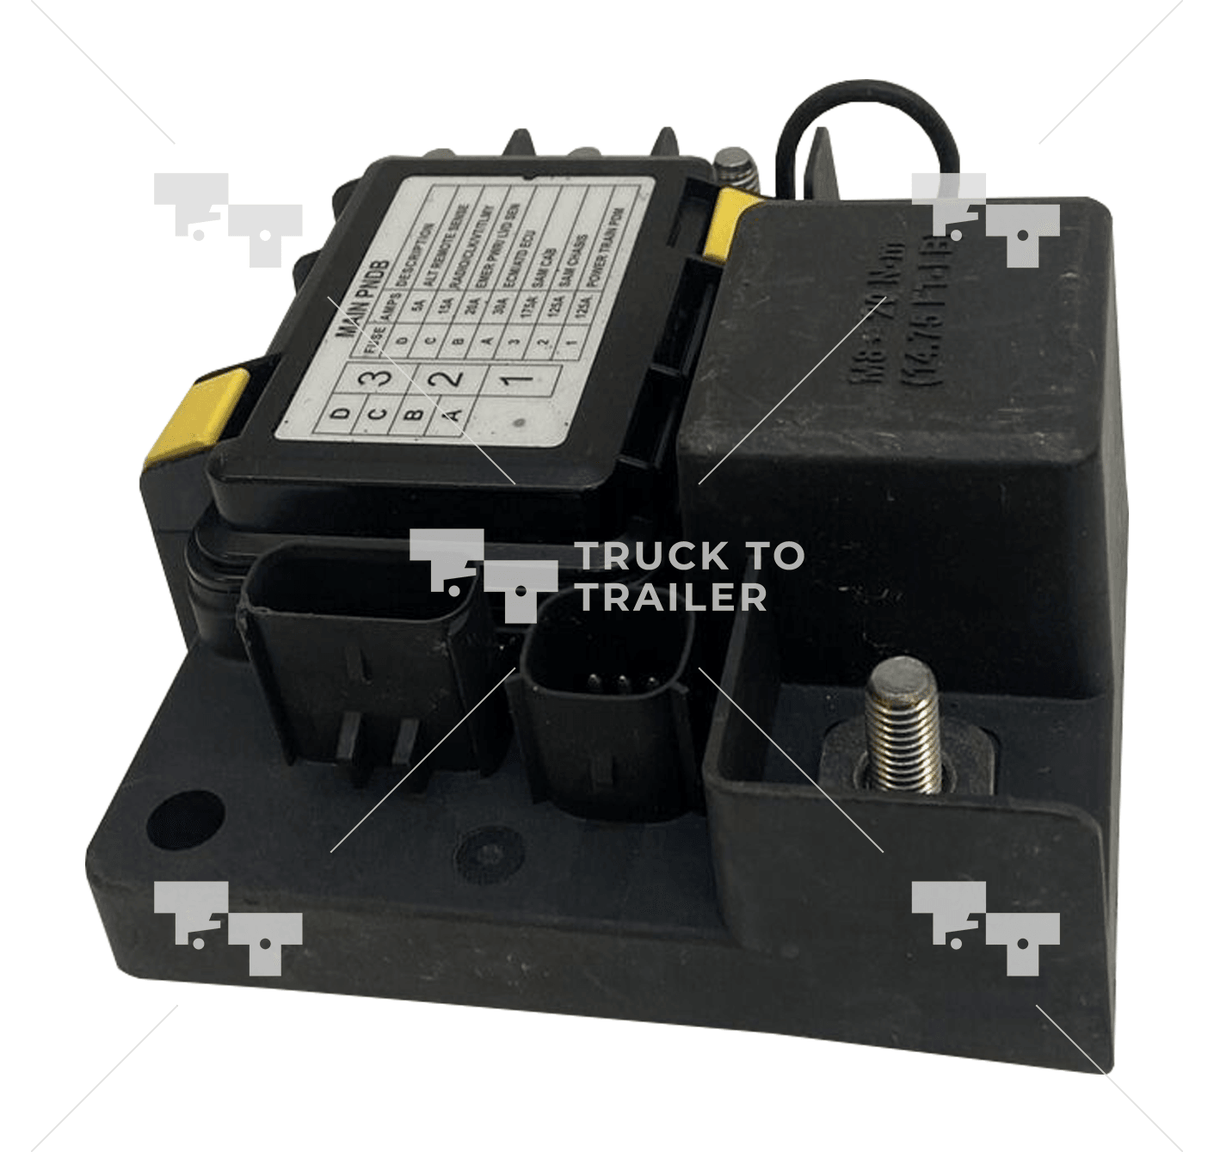 A66-03714-009 Genuine Freightliner Junction Box Idle Cut-Off Switch